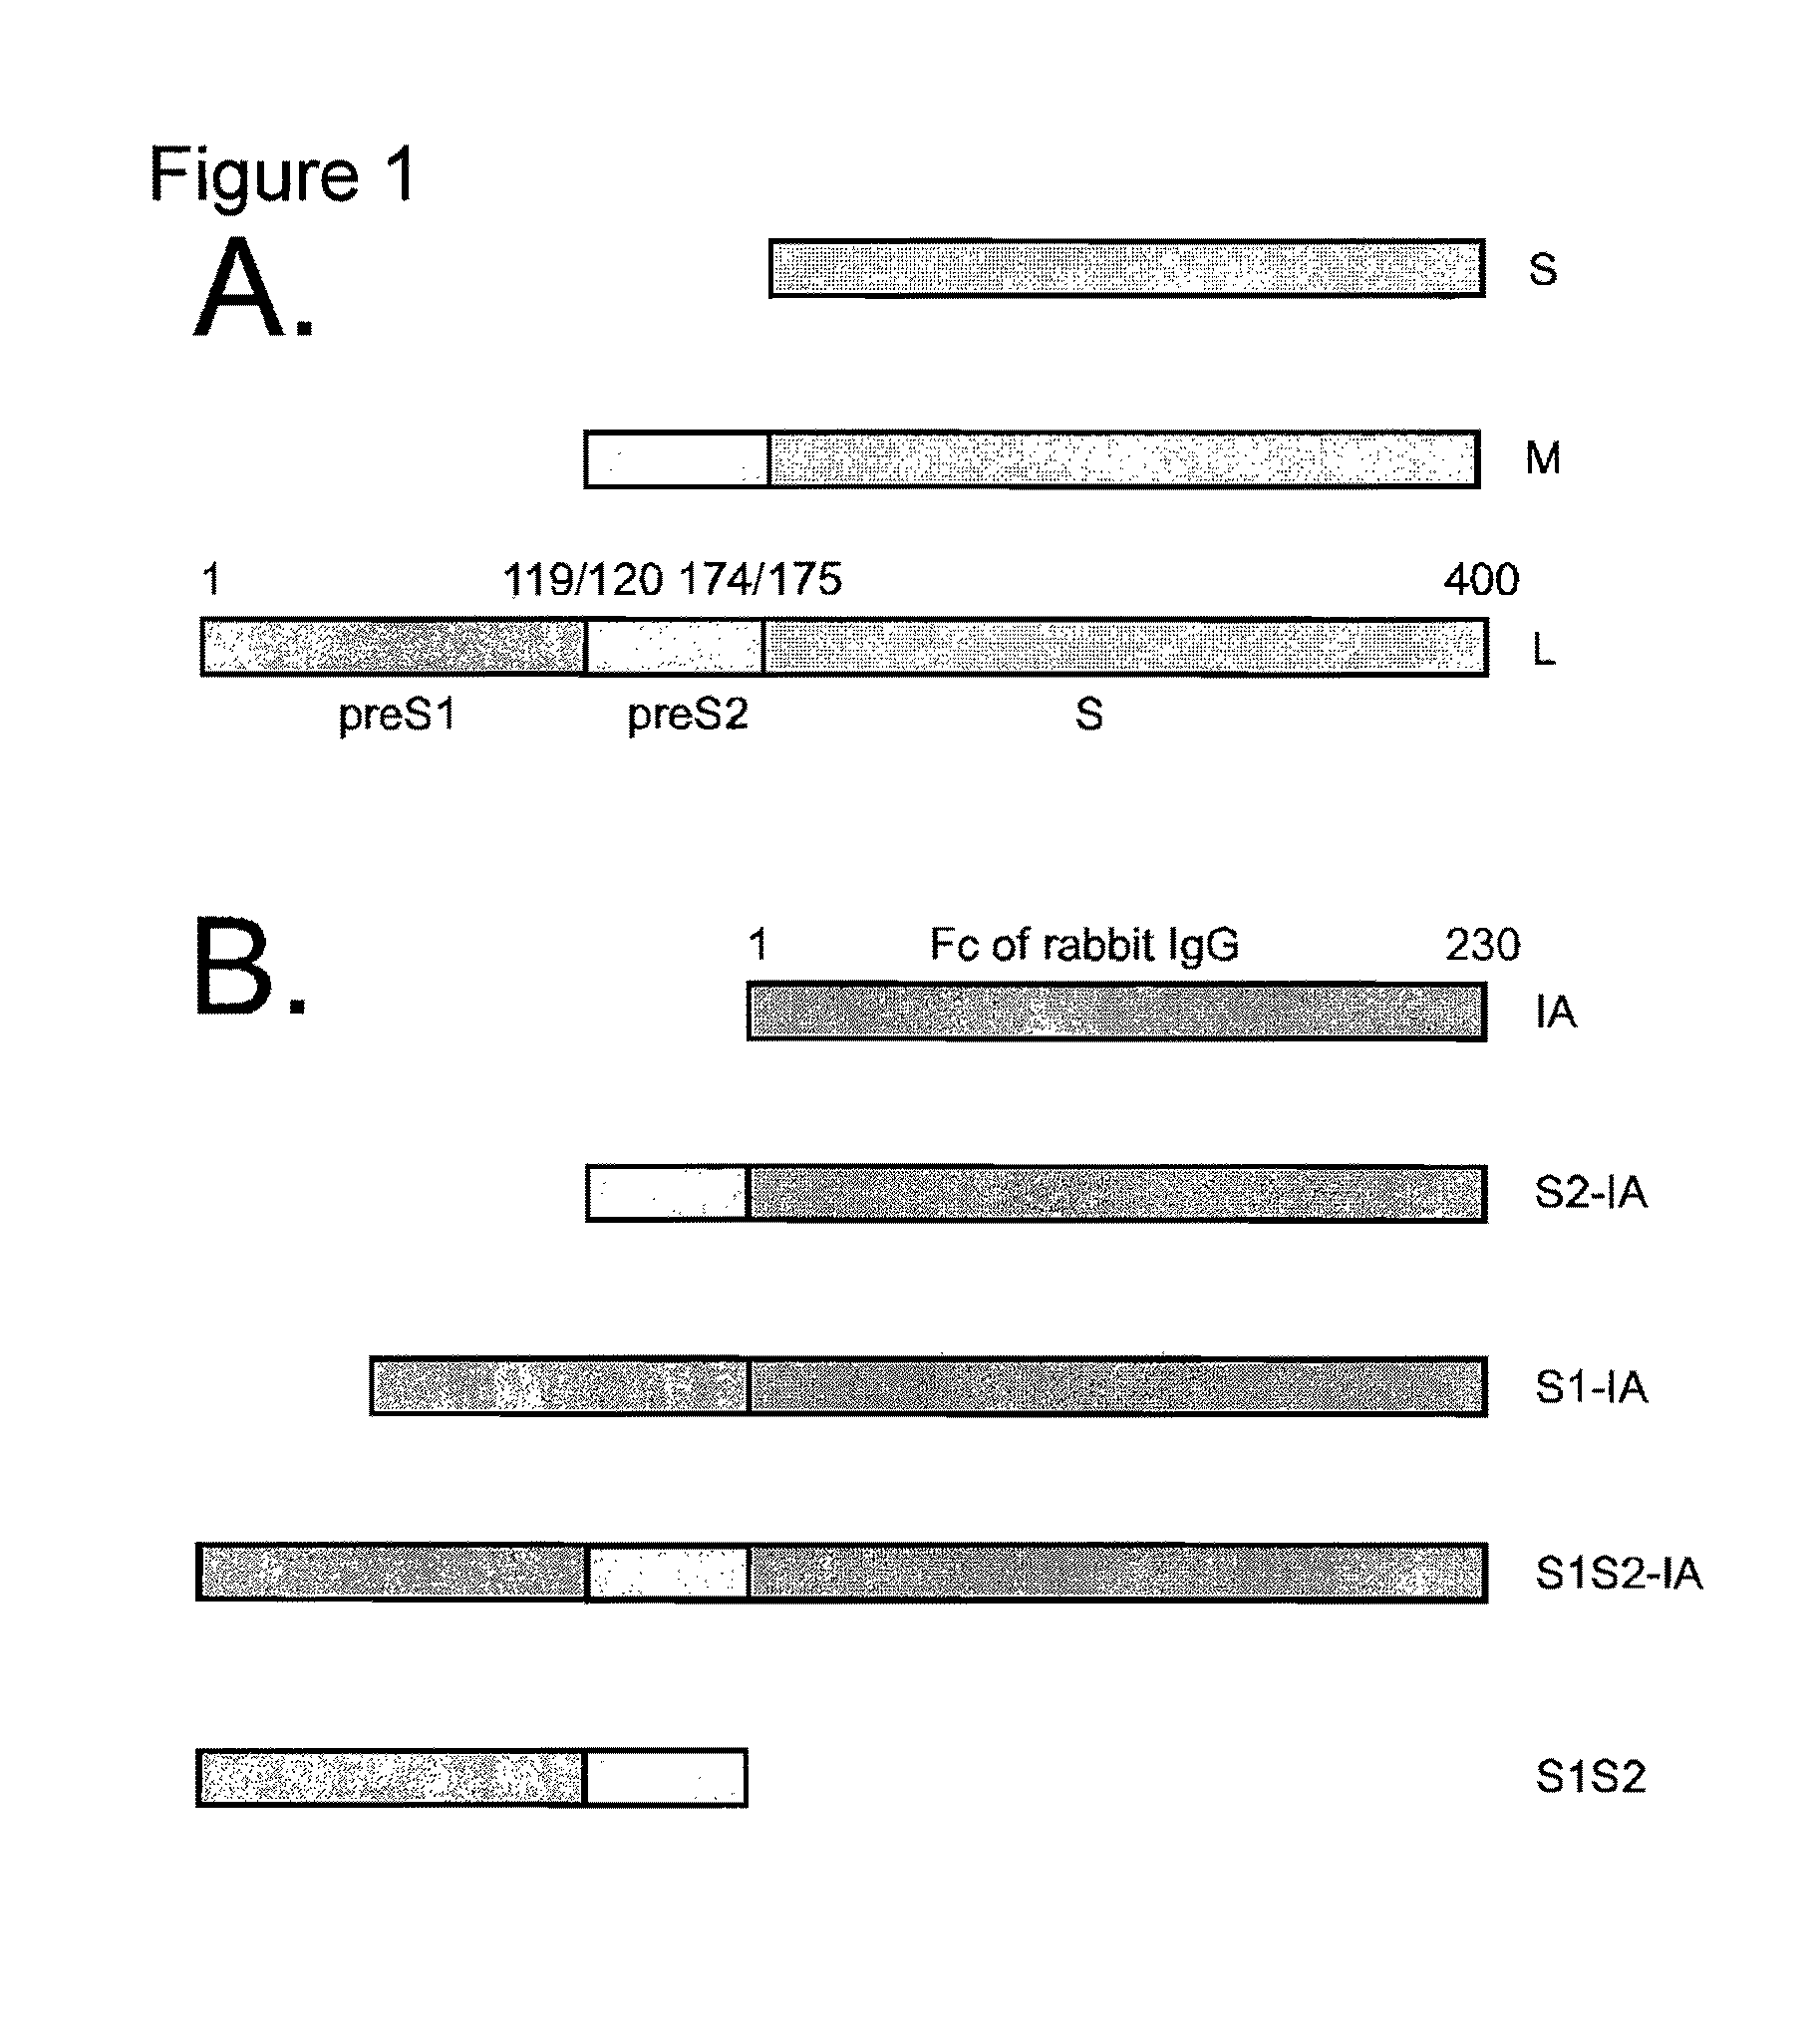 Hepatitis B virus compositions and methods of use